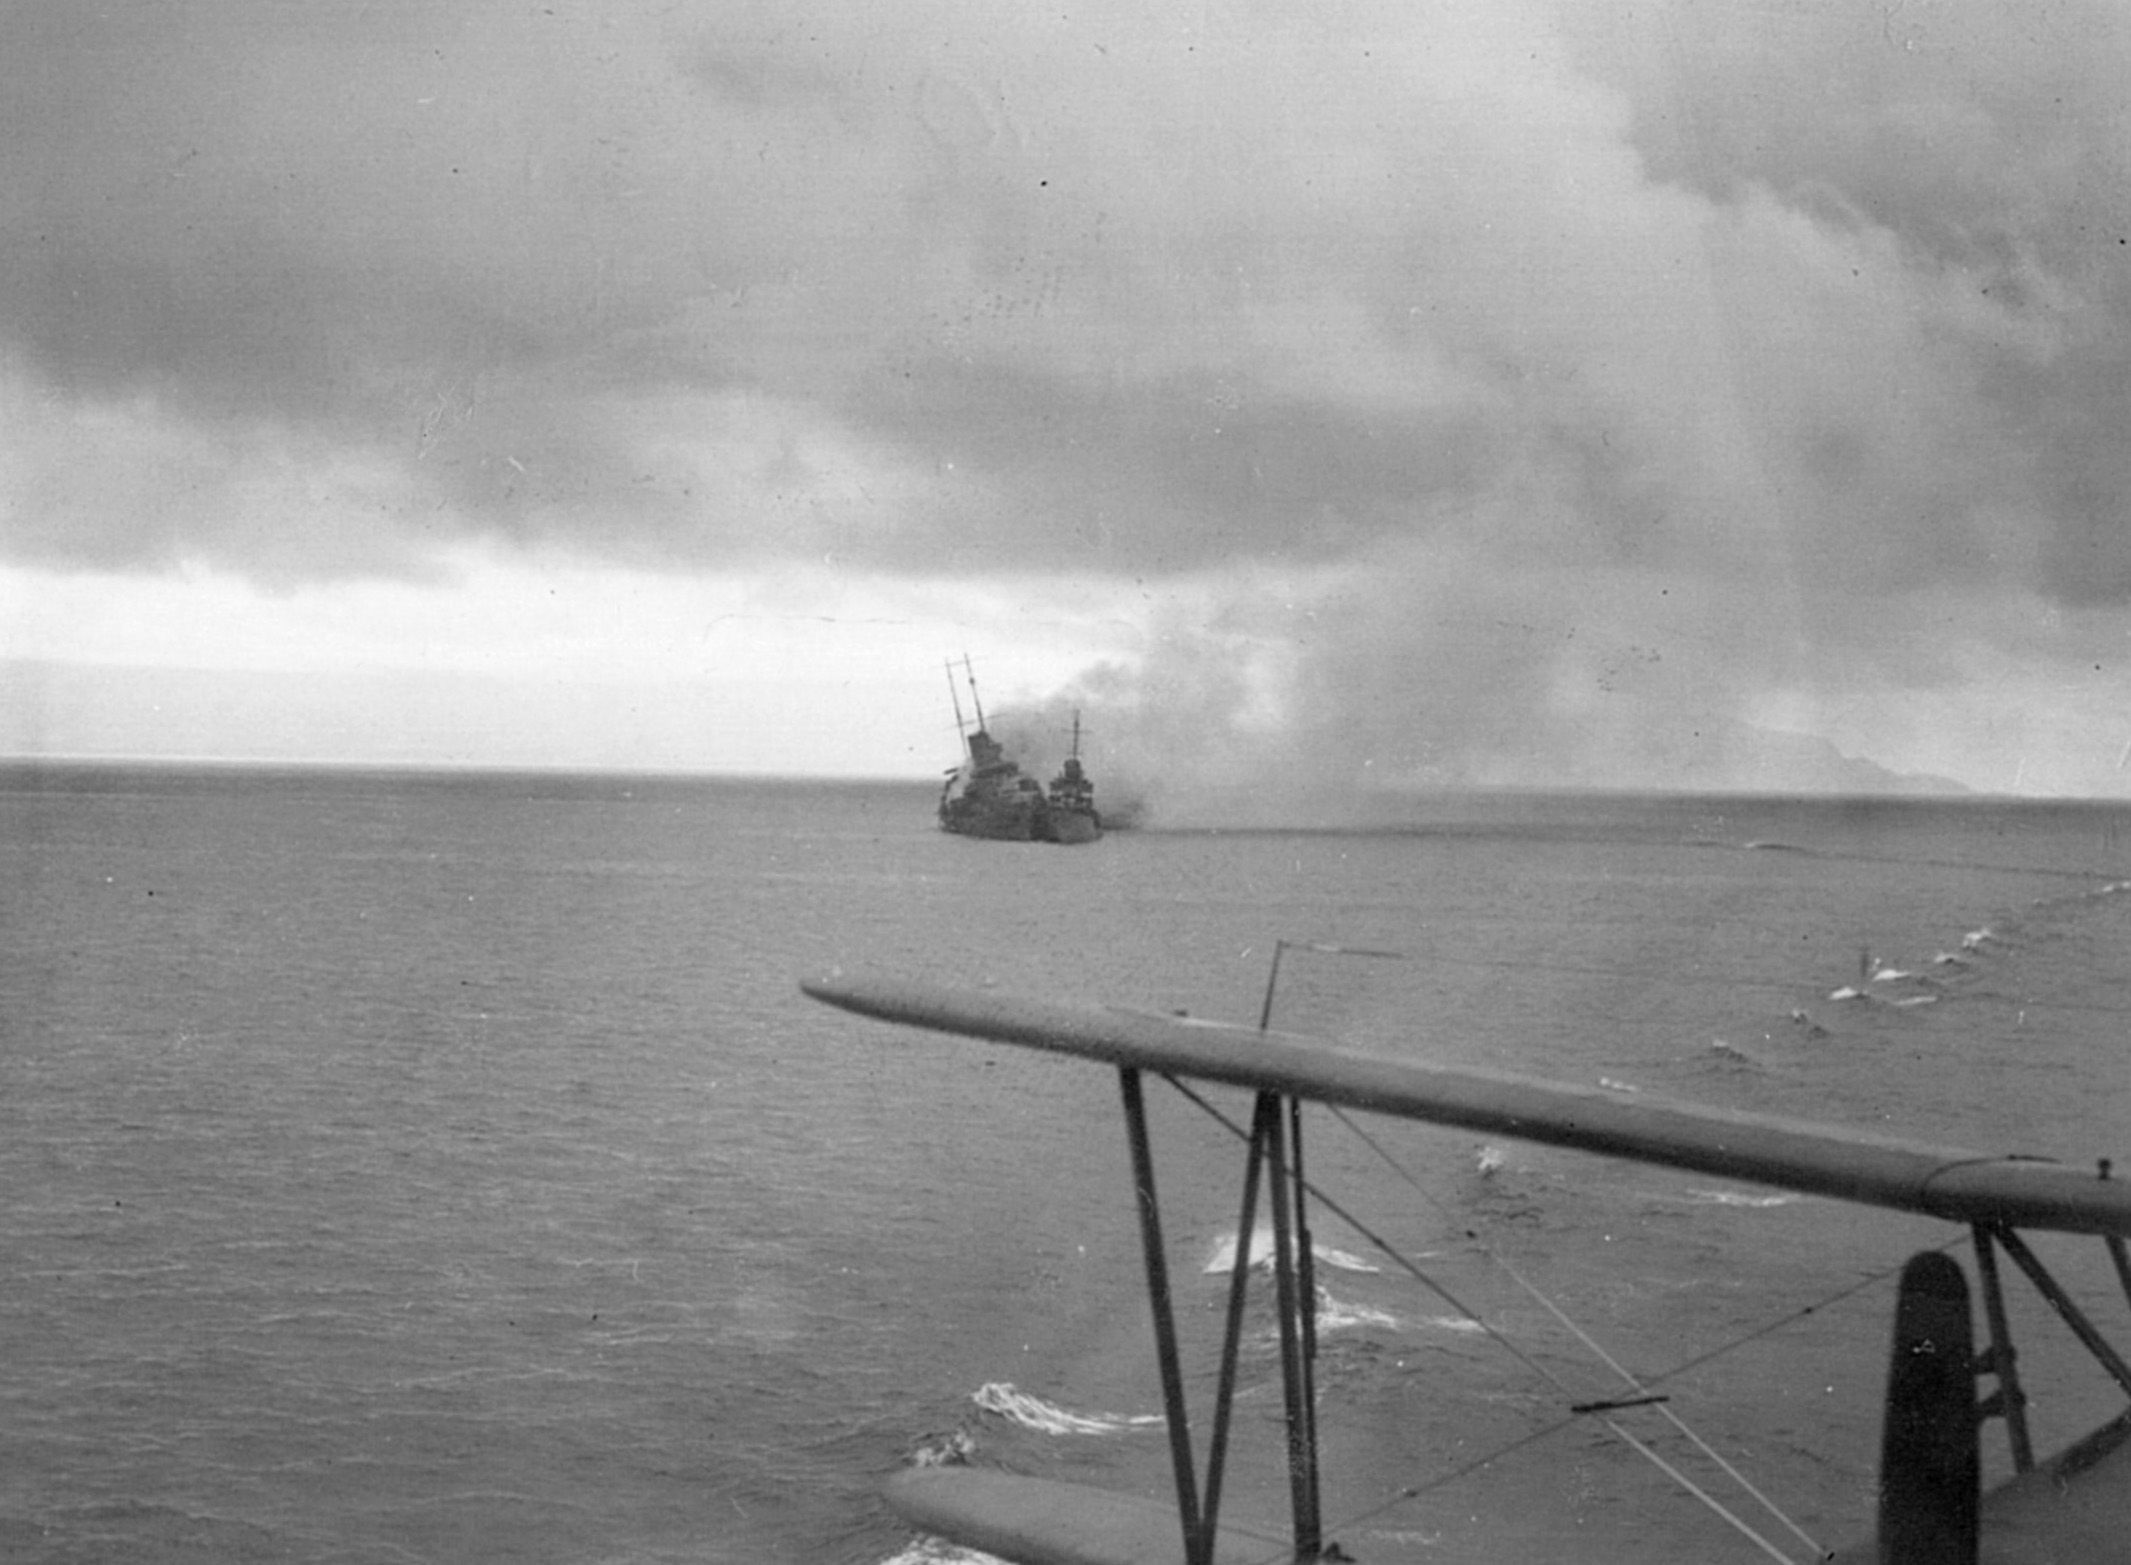 In a photograph taken from the deck of the USS Chicago, the Australian cruiser Canberra lists to starboard and belches smoke as a destroyer pulls alongside to rescue crewmen.